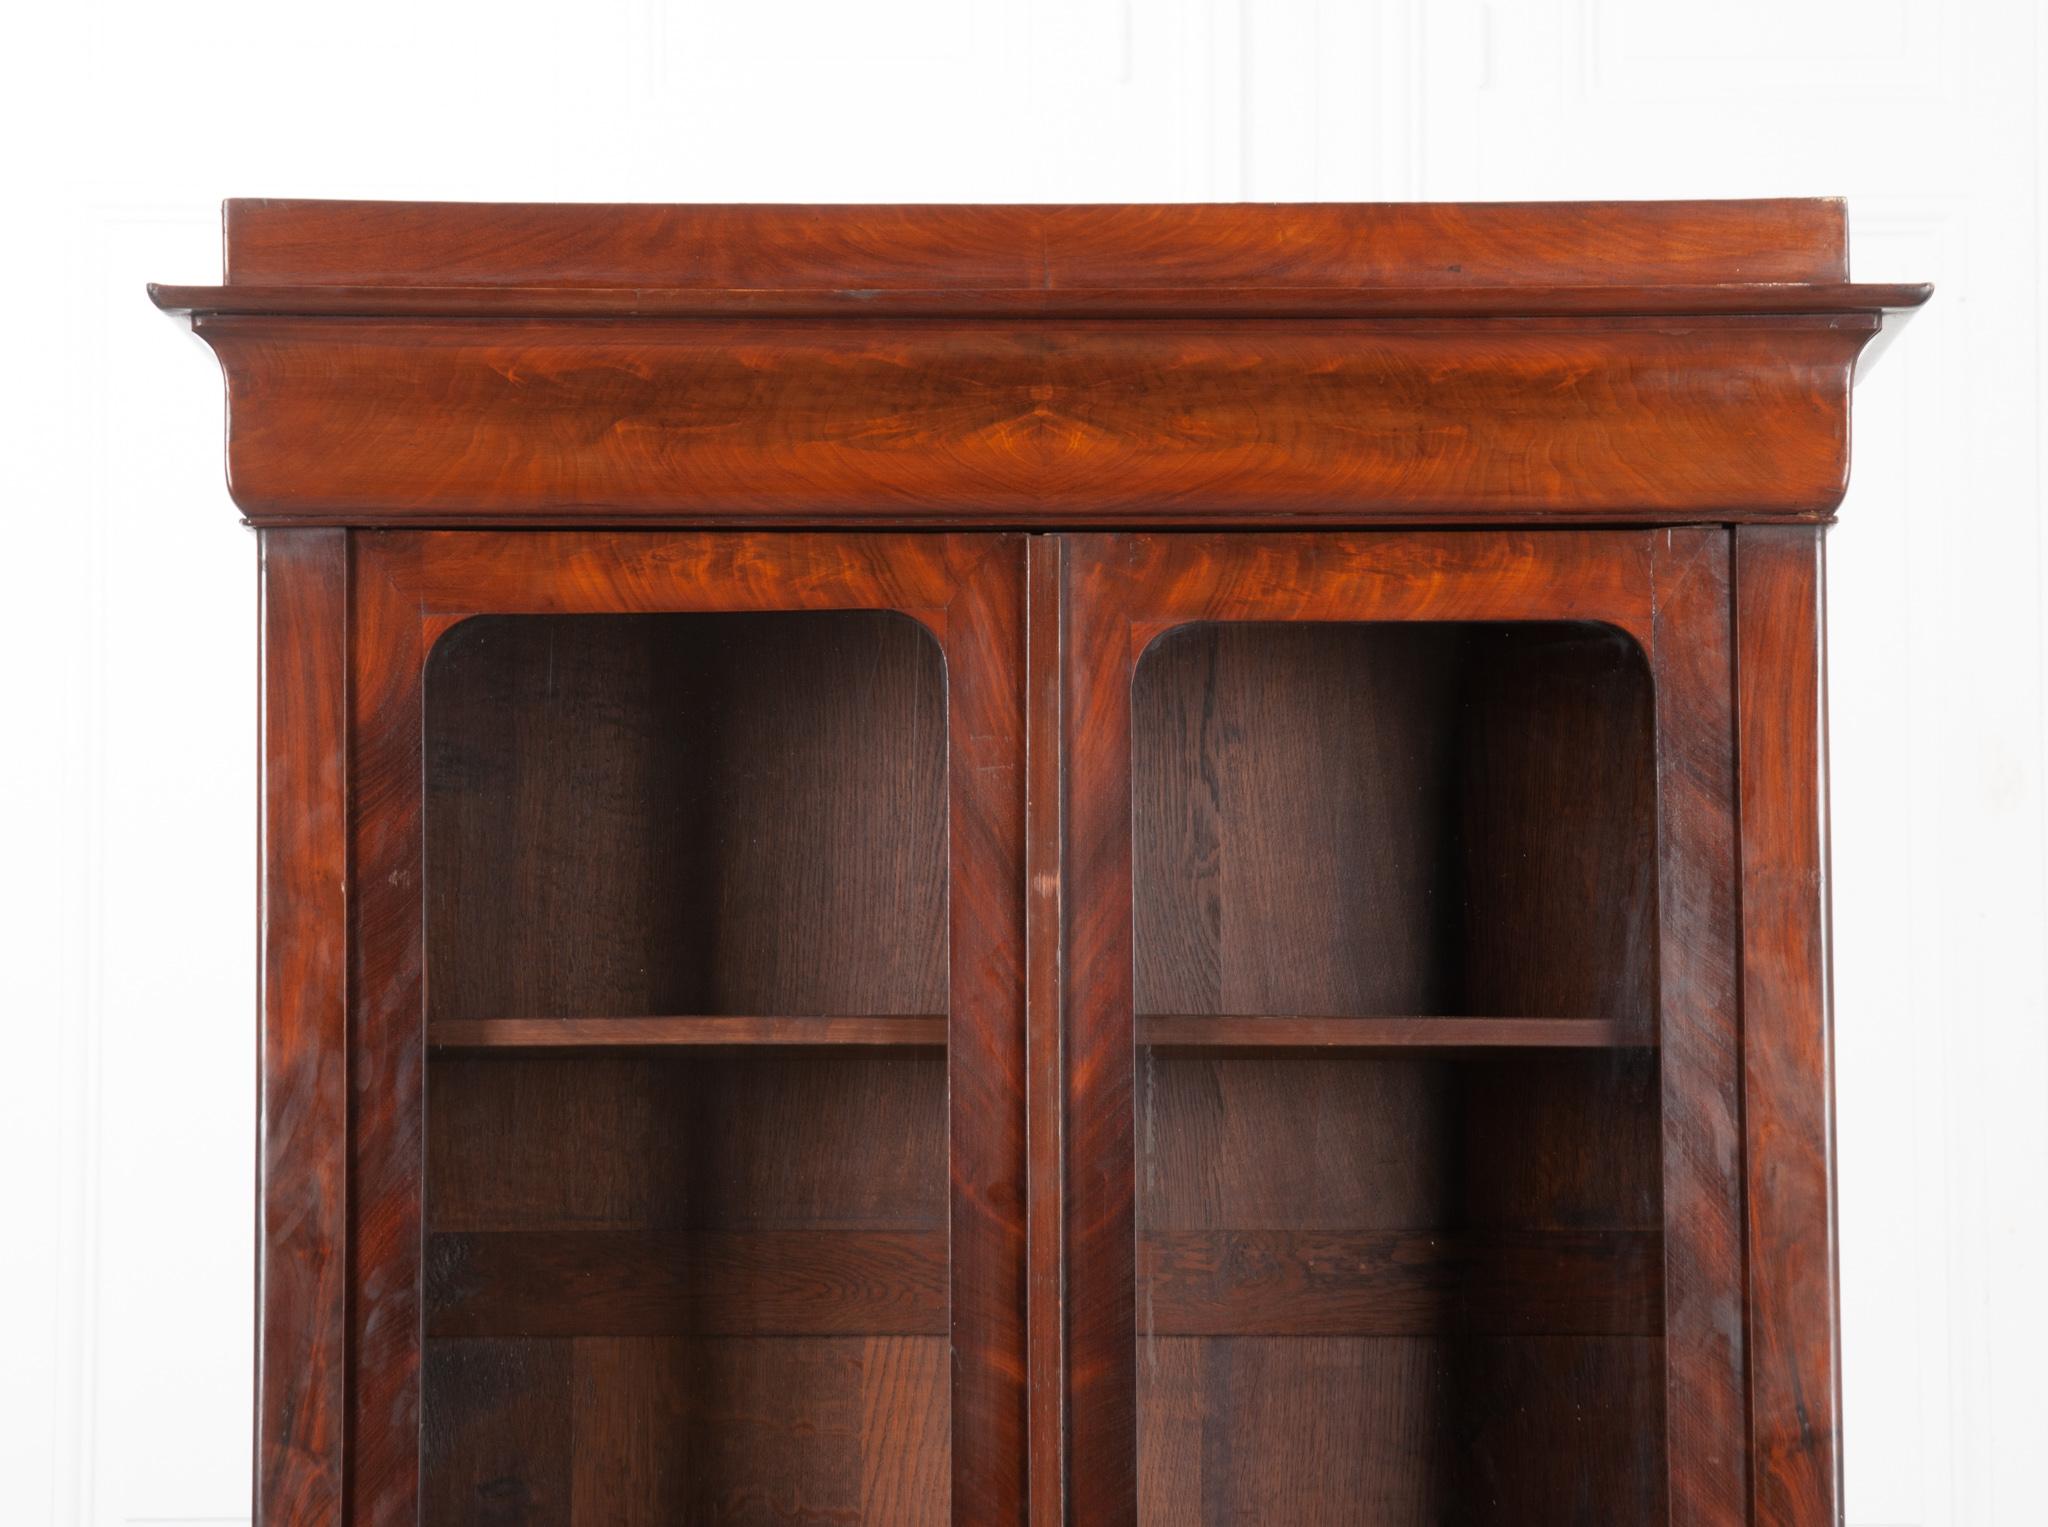 This is a handsome Louis Philippe bibliotheque from 19th century France. Made of rich bookmatched mahogany for a great symmetrical look. The crown is 14”D, the body is a little slimmer at 12”D. The doors feature the original wavy glass and a